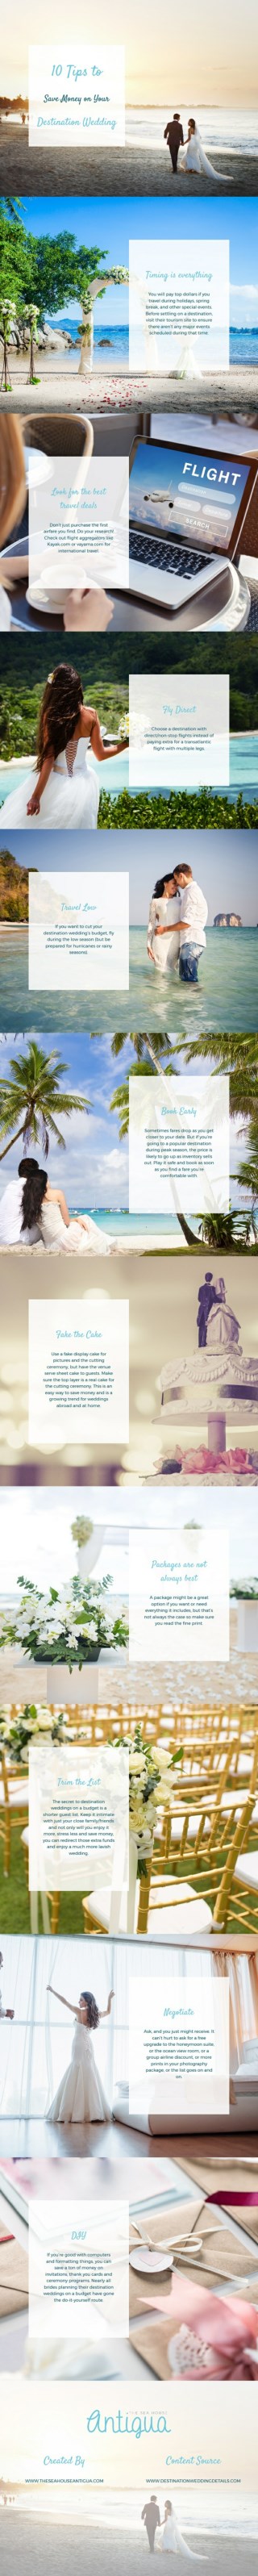 10 Tips to Save Money on Your Destination Wedding